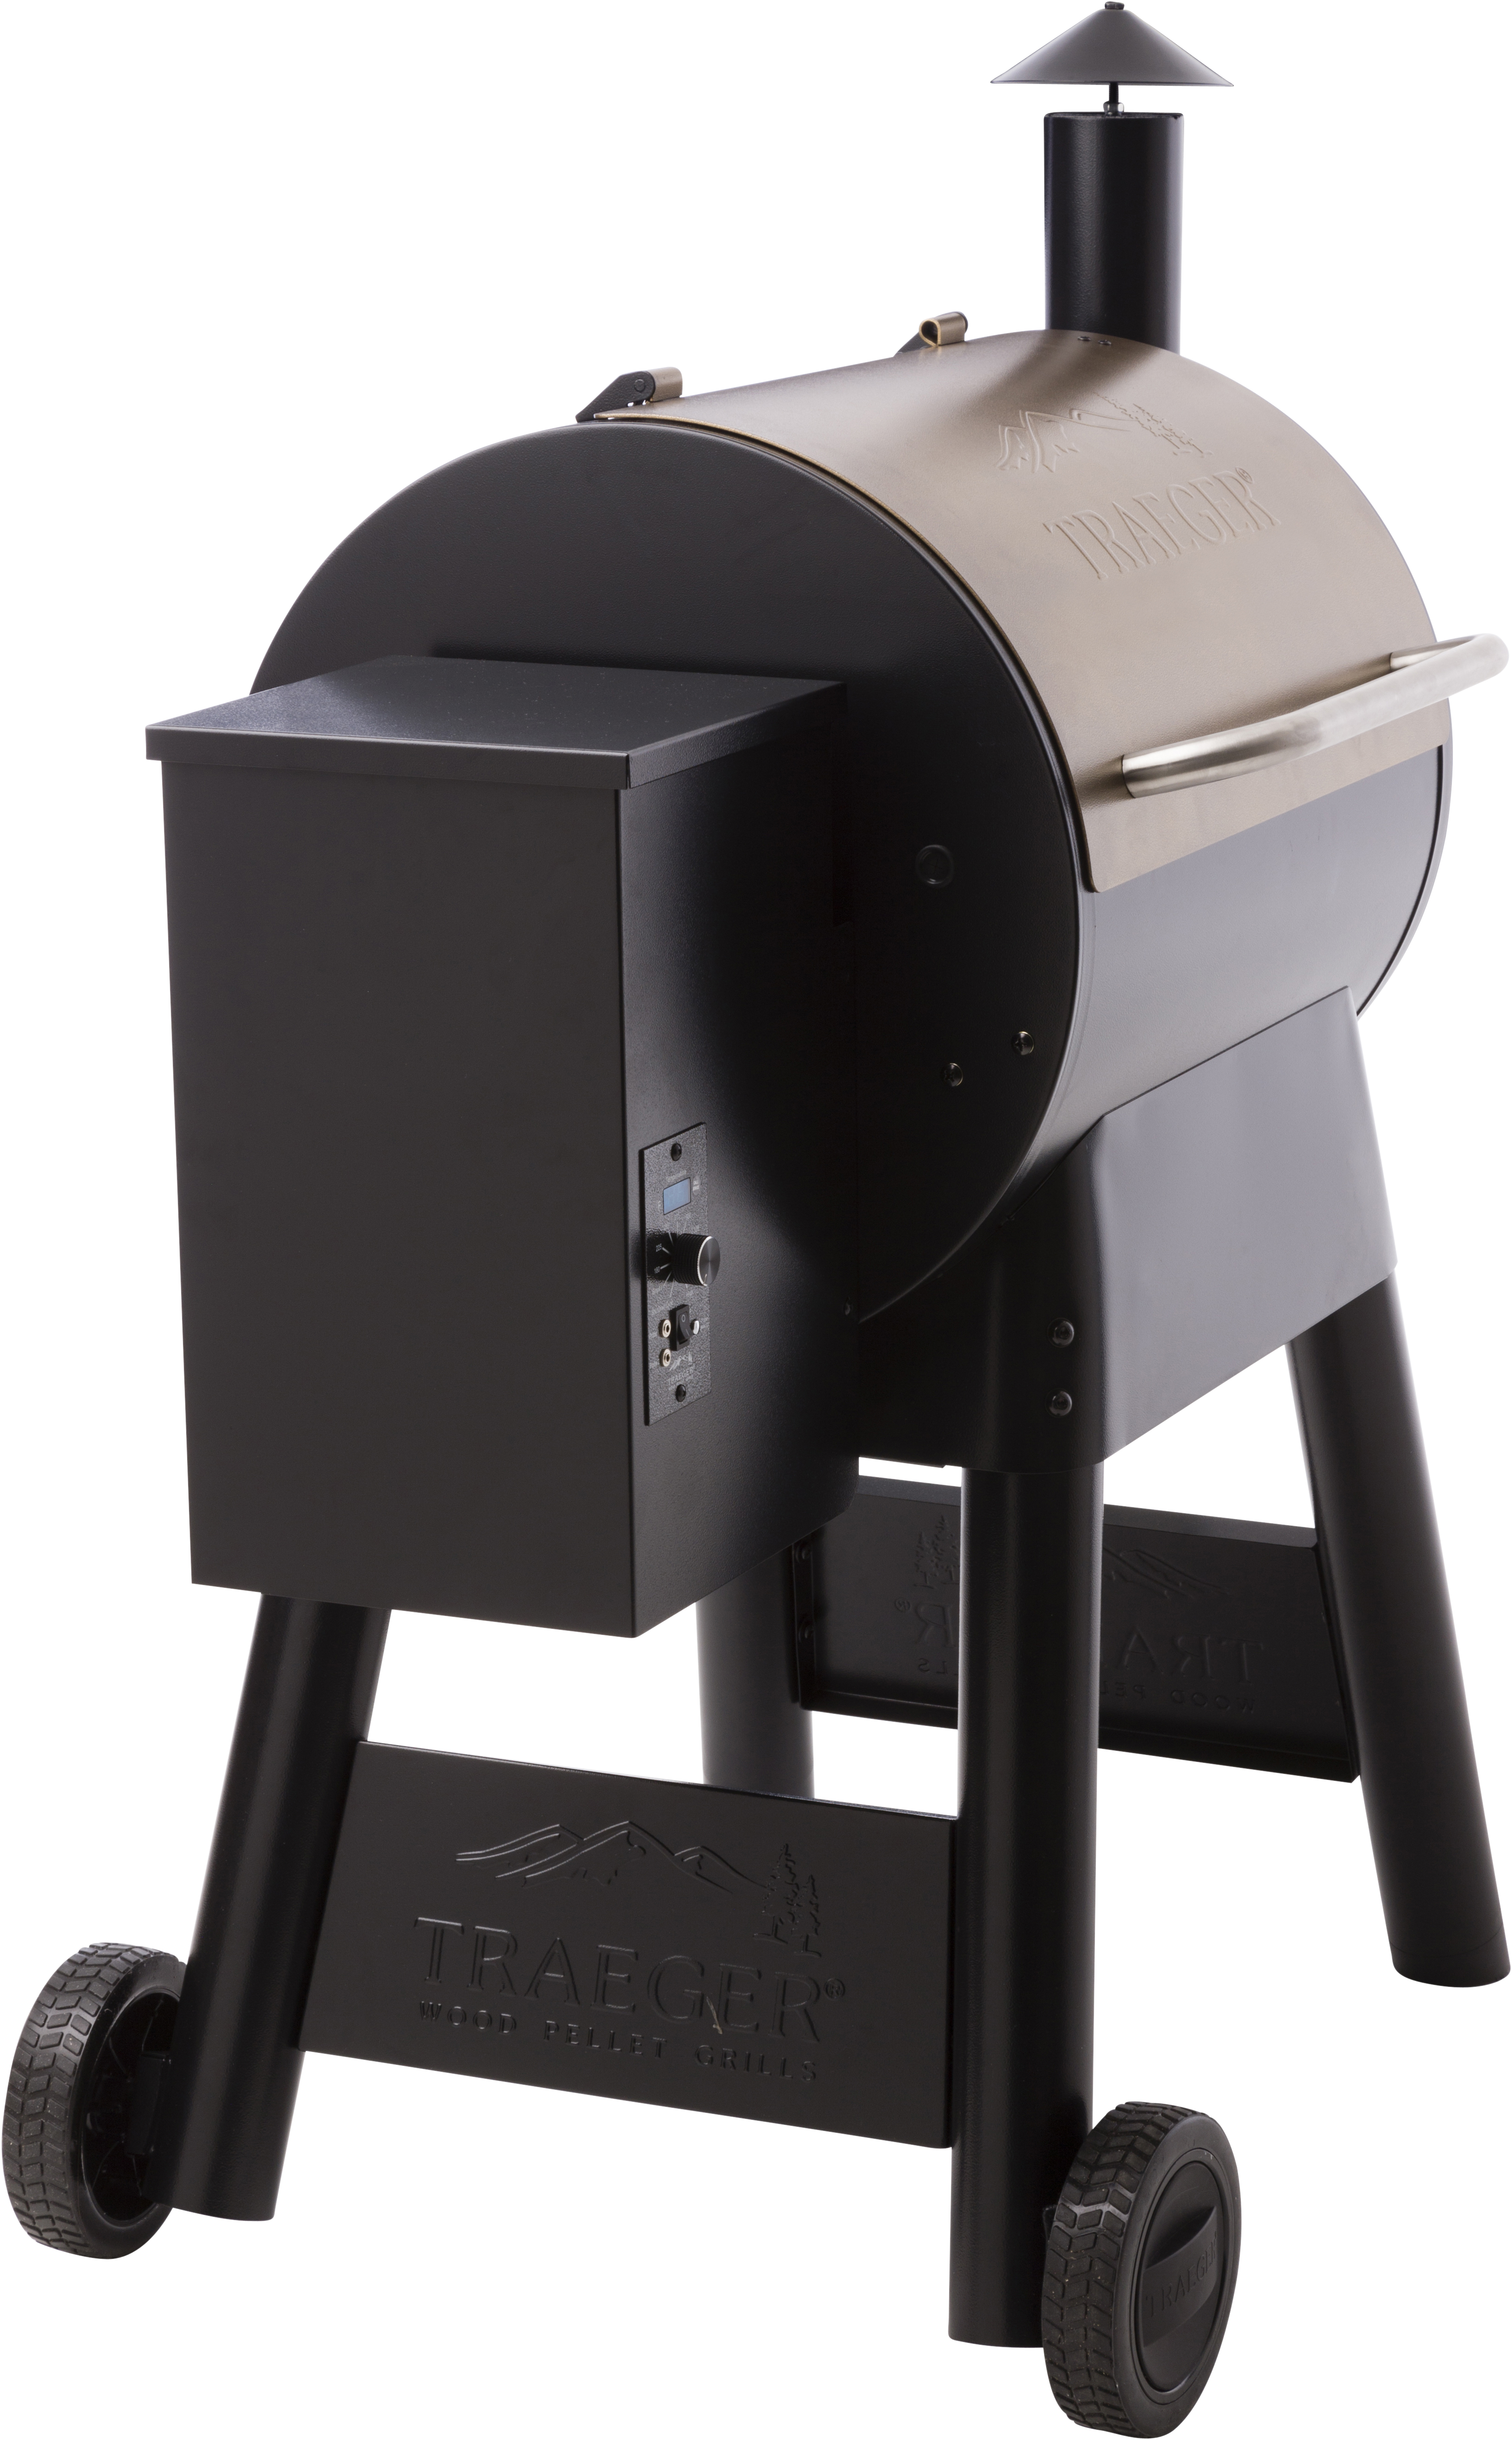 Traeger Pellet Grills Pro 22 Wood Pellet Grill and Smoker - Bronze - image 3 of 10